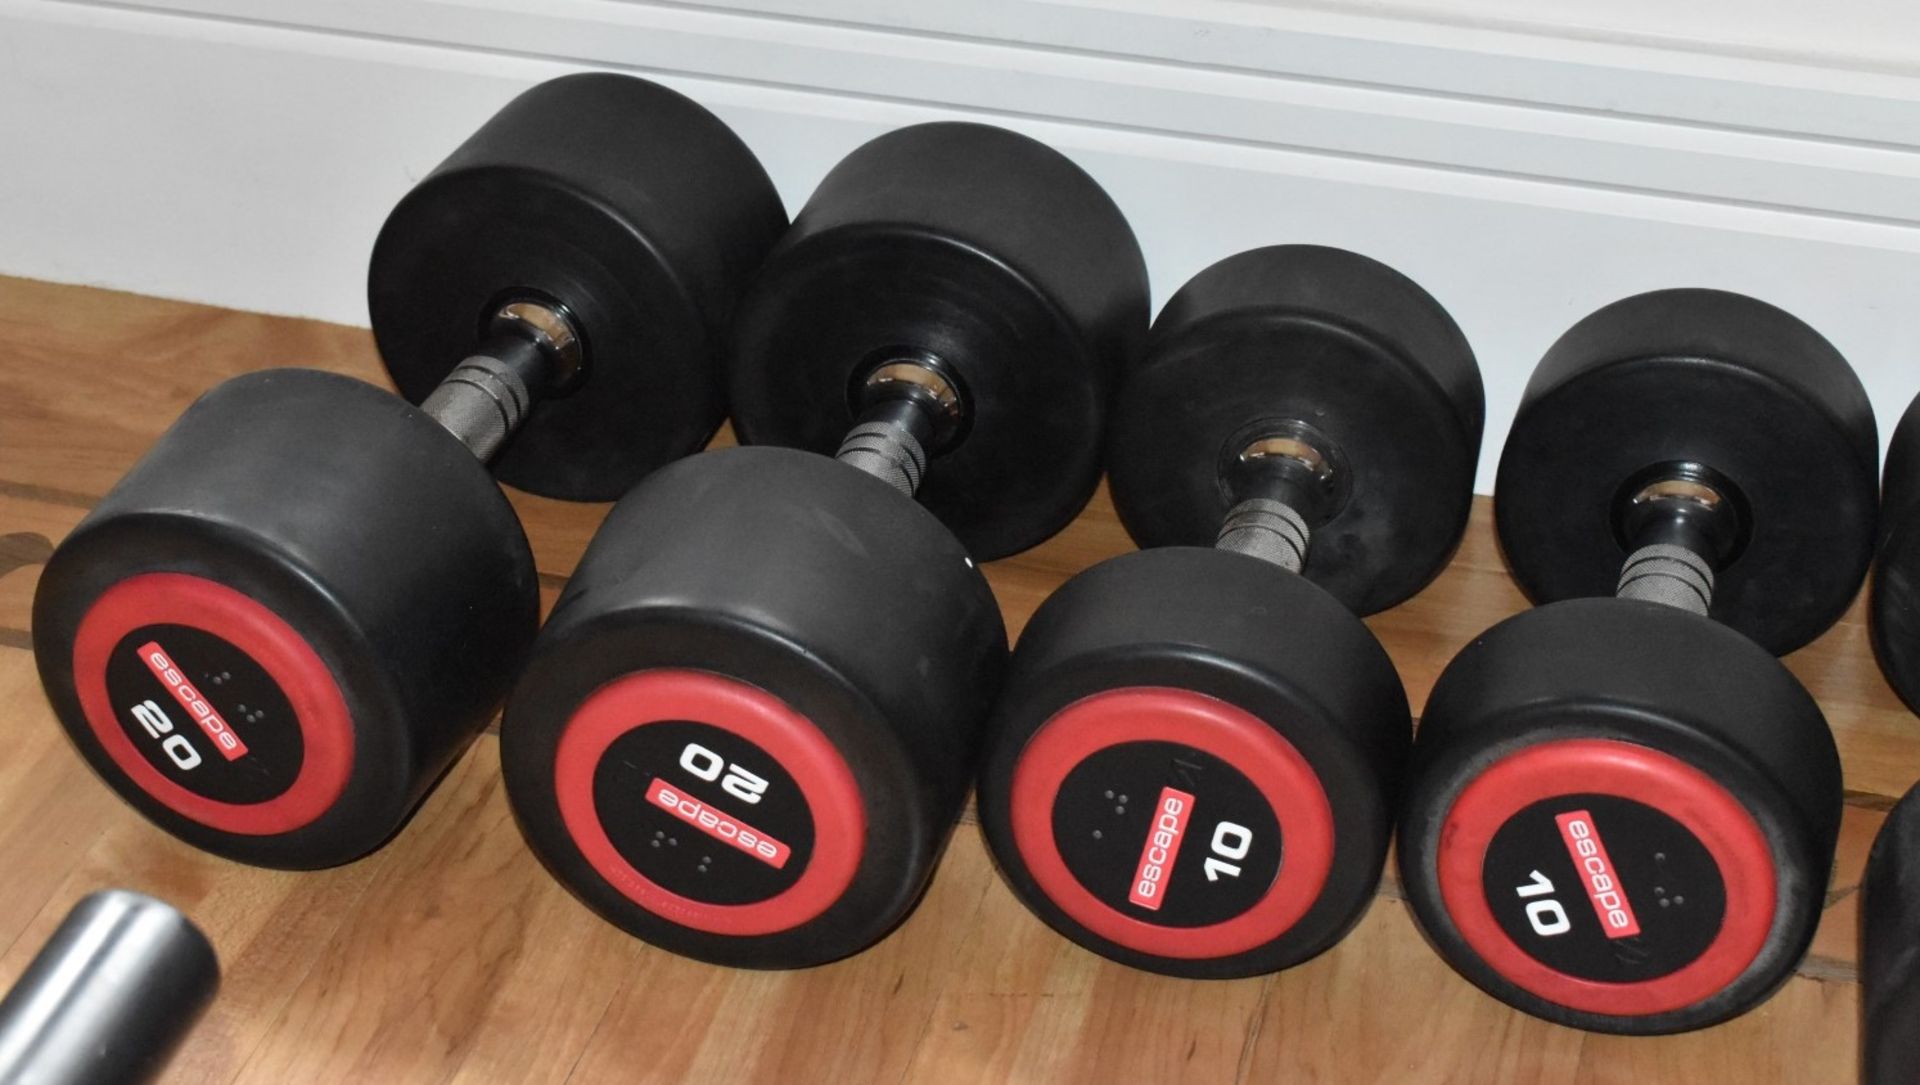 3 x Sets of Escape Polyurethane Dumbell Weights - Includes Pairs of 10kg, 16kg and 20kg Dumbells - 6 - Image 2 of 5